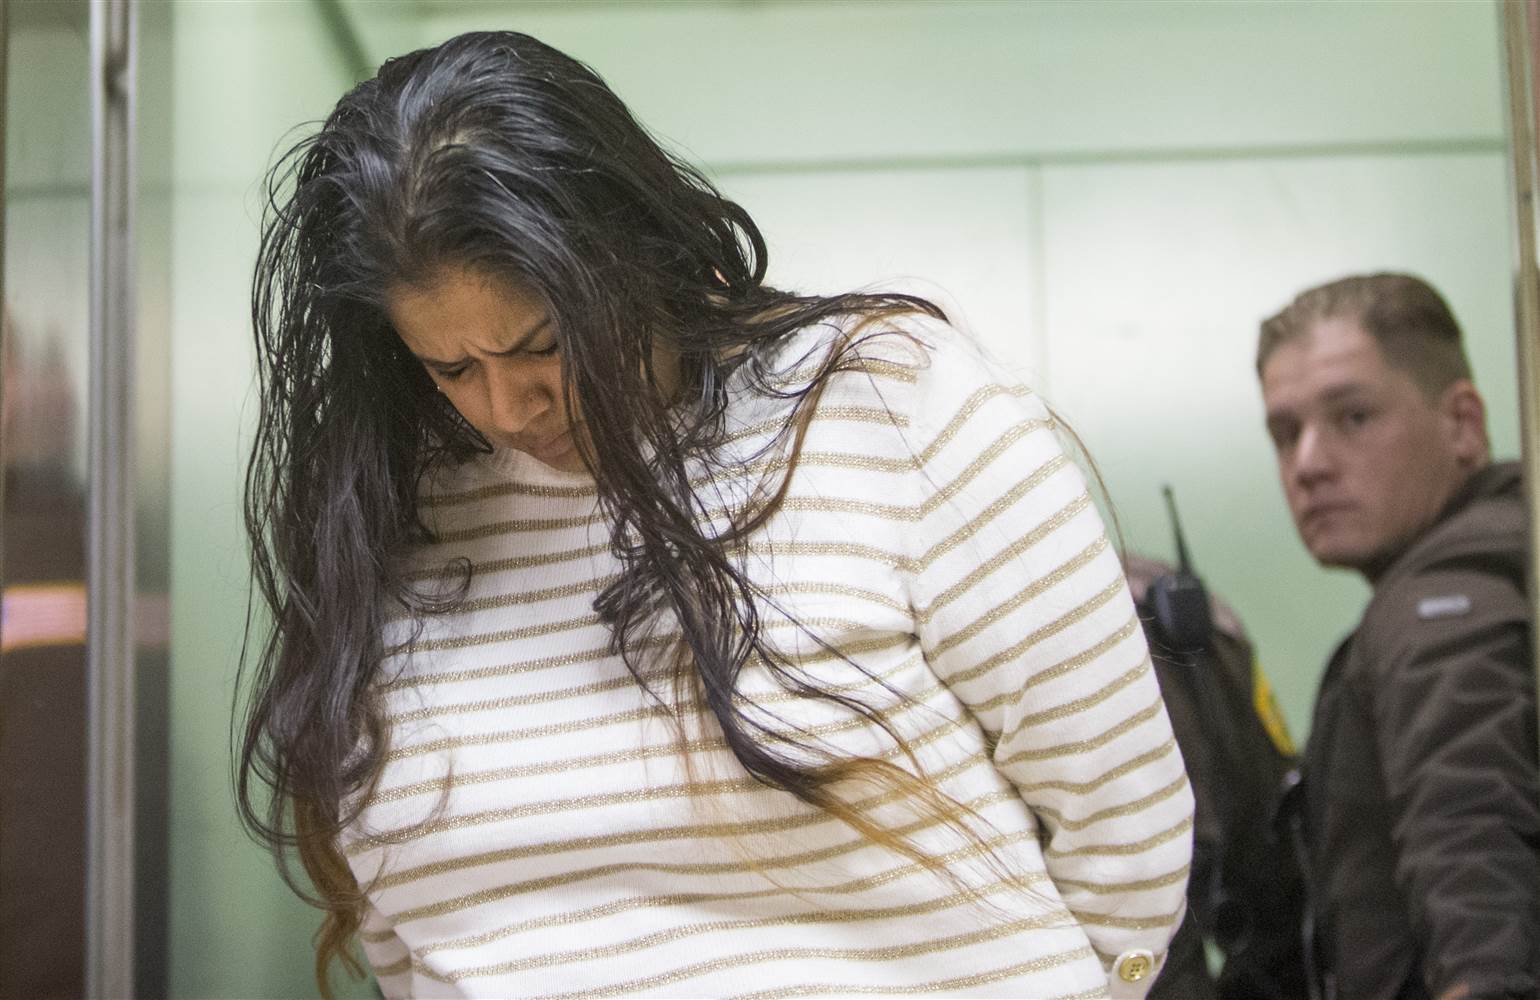 Purvi Patel set to be released from prison after state decides against appeal